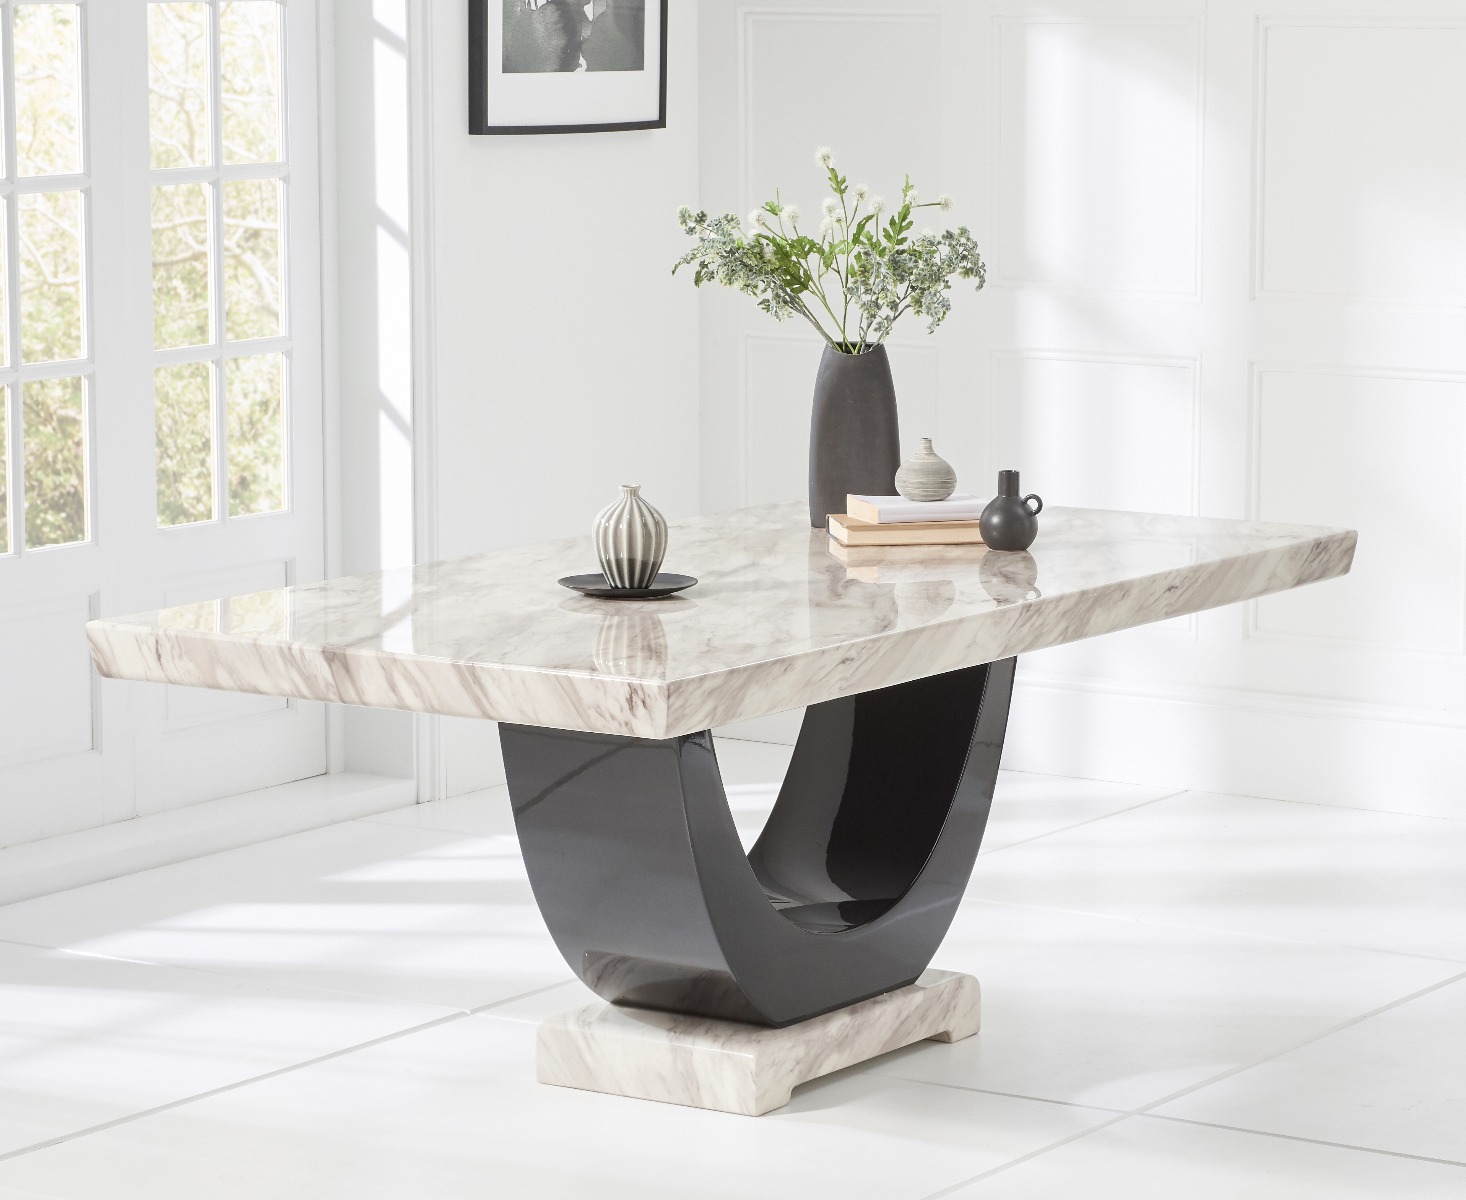 Photo 2 of Raphael 200cm cream and black pedestal marble dining table with 6 grey sophia chairs